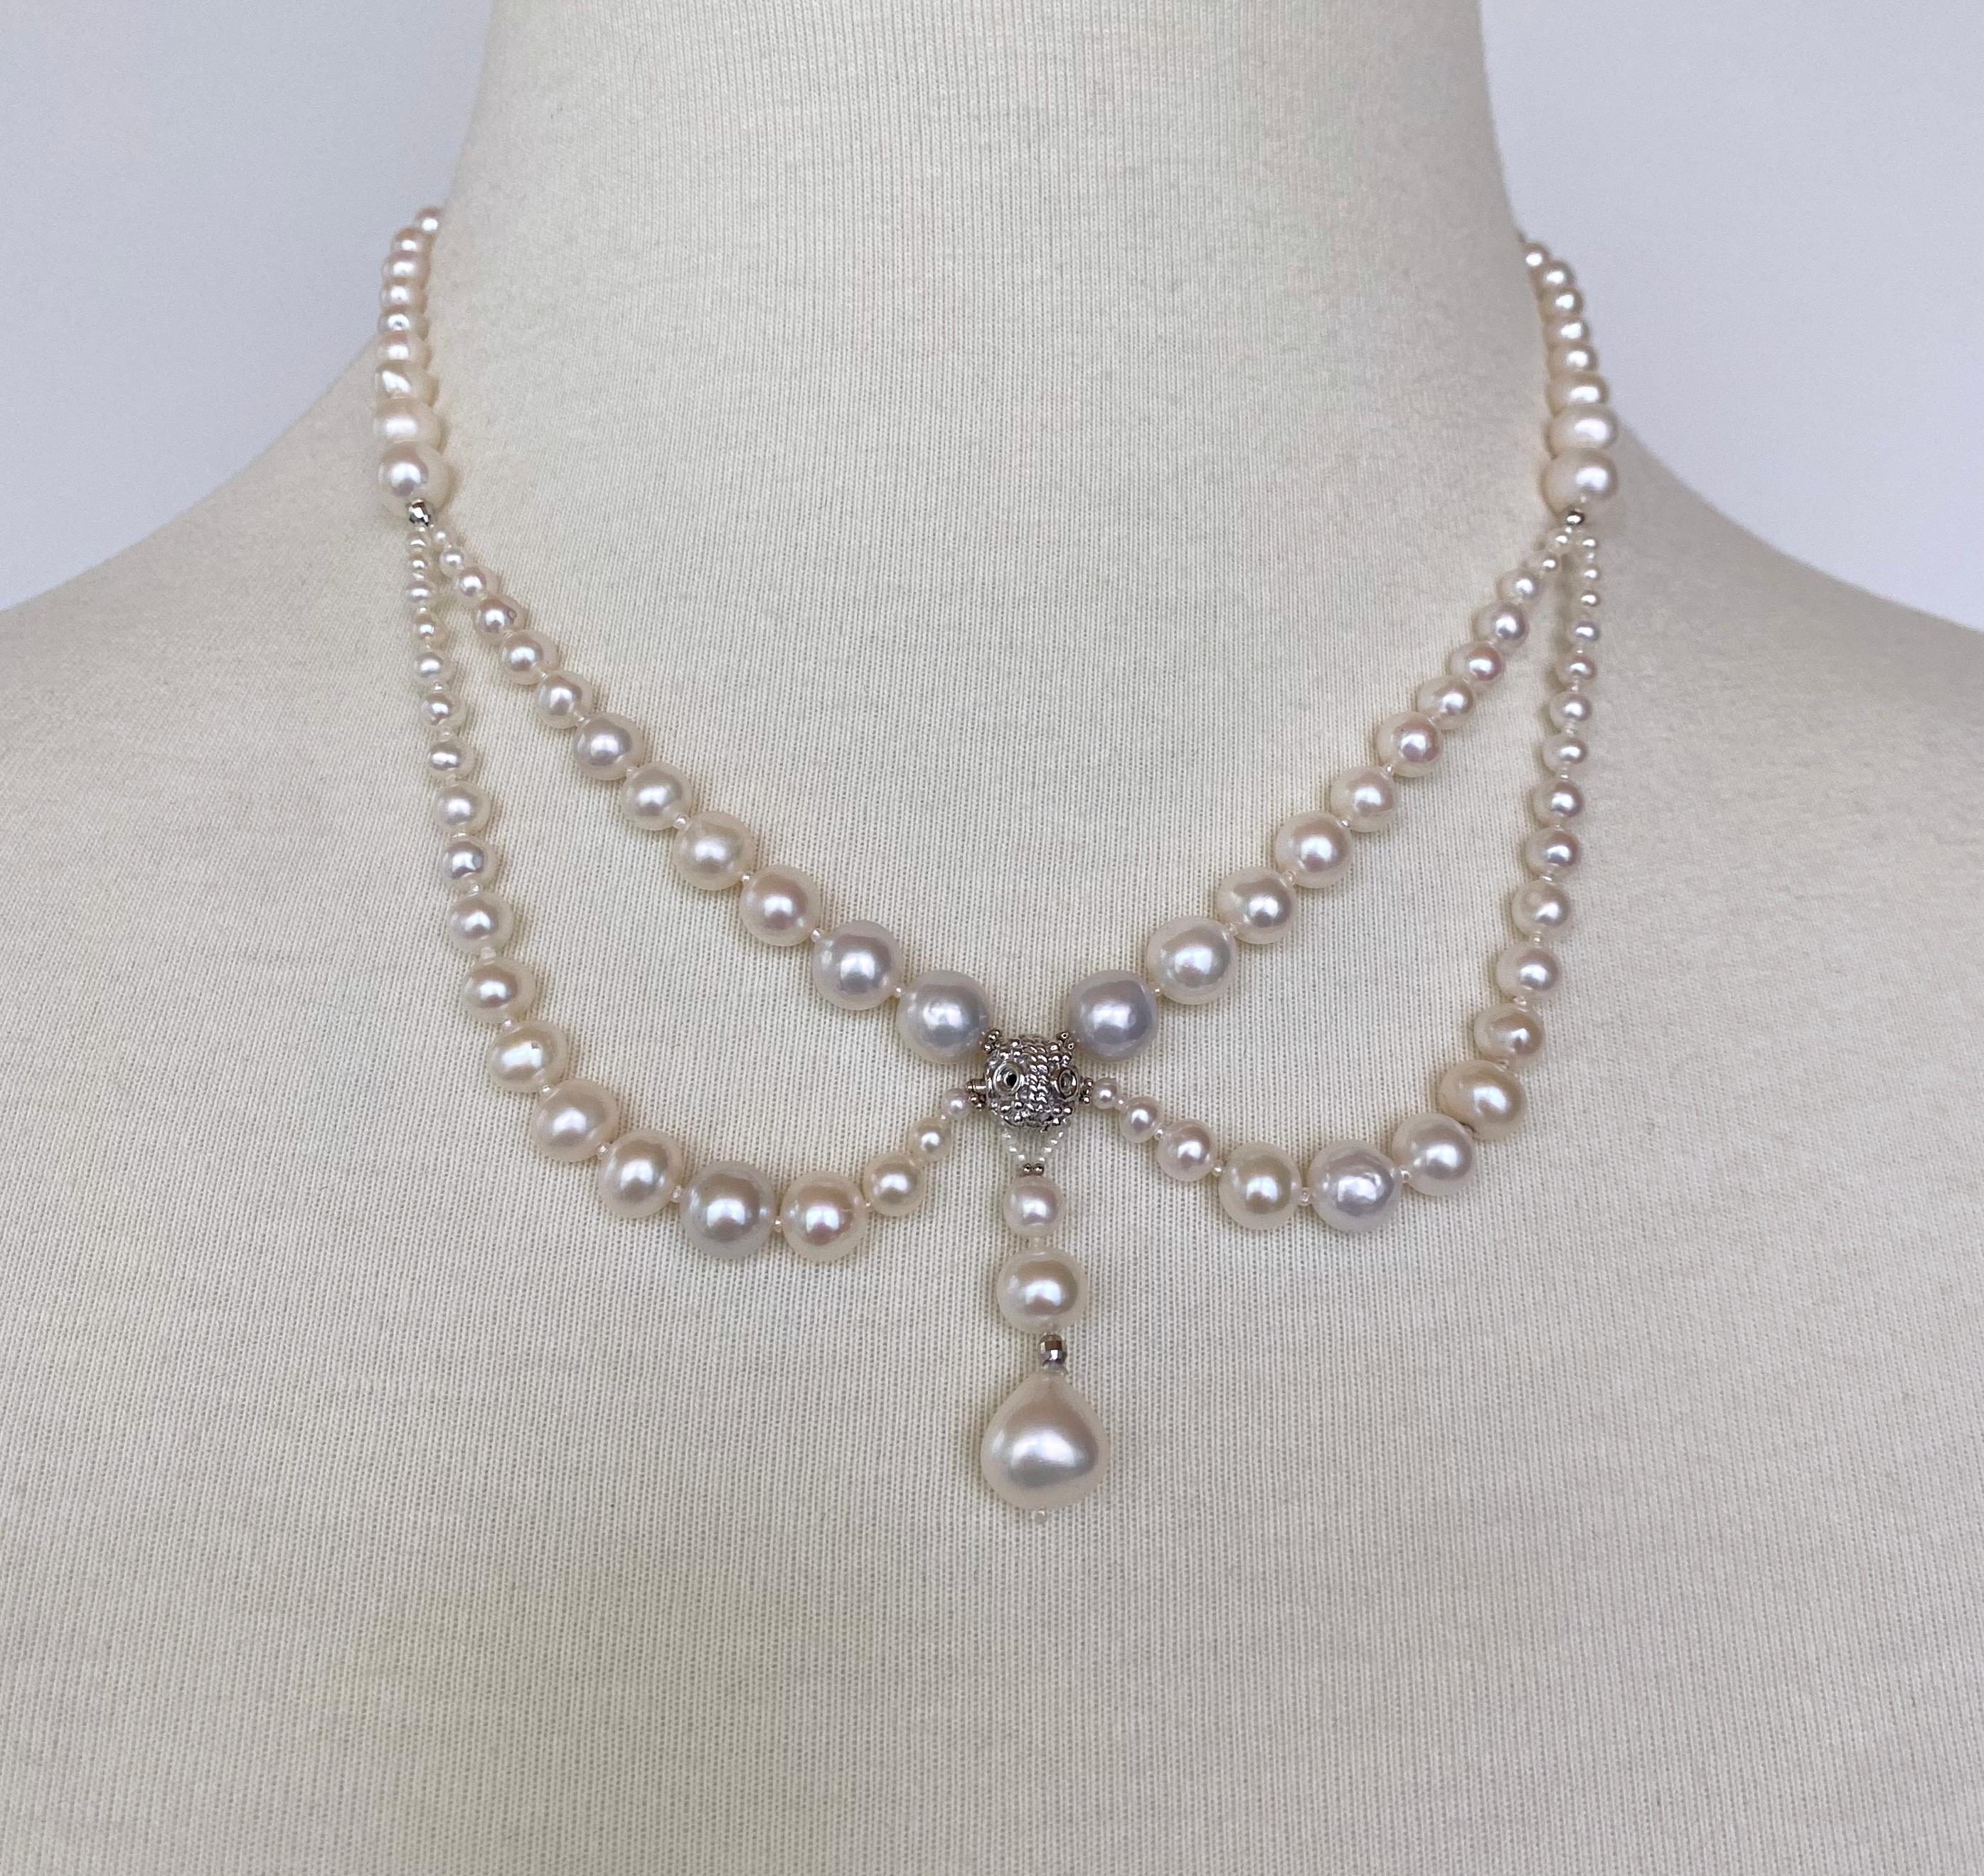 Gorgeous Victorian inspired Necklace by Marina J. This lovely piece features a Rhodium plated Silver decorative Filigree Bead which sits as the Centerpiece. Strands of Graduated Pearls are draped around it, giving a vintage regal and innocent feel